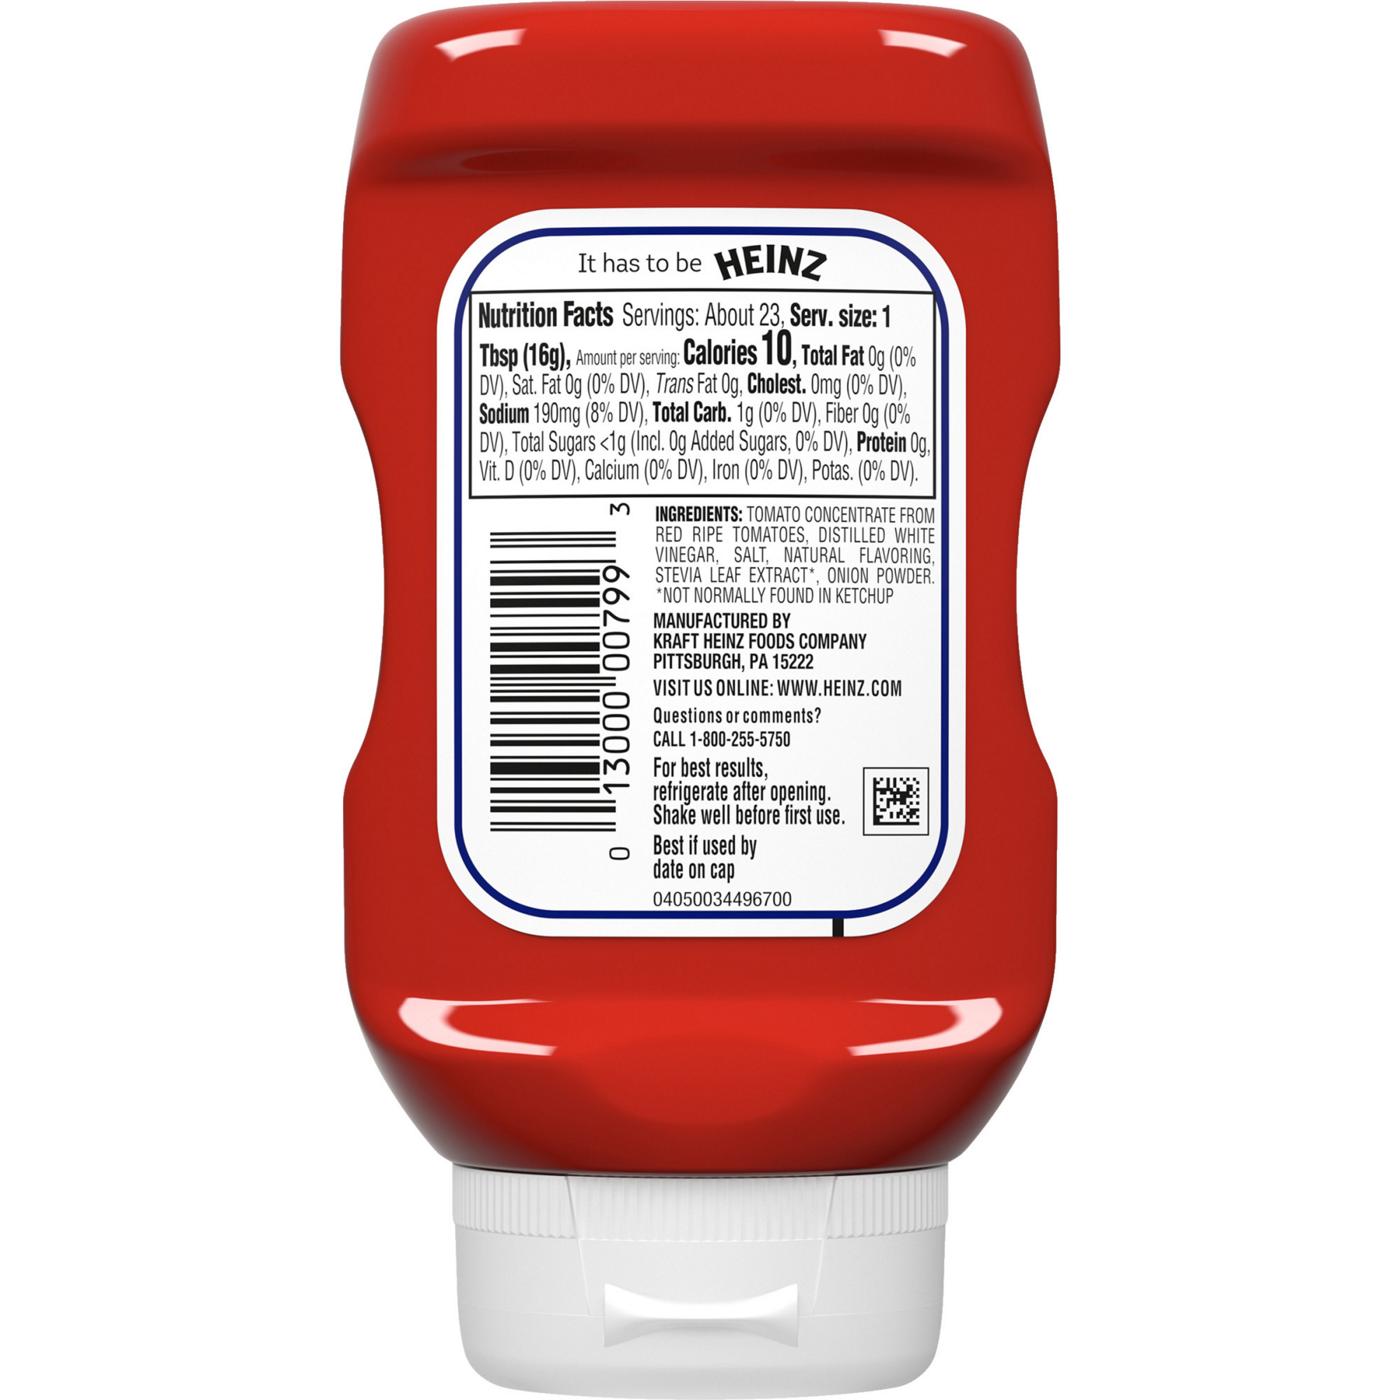 Heinz Reduced Sugar Ketchup; image 5 of 7